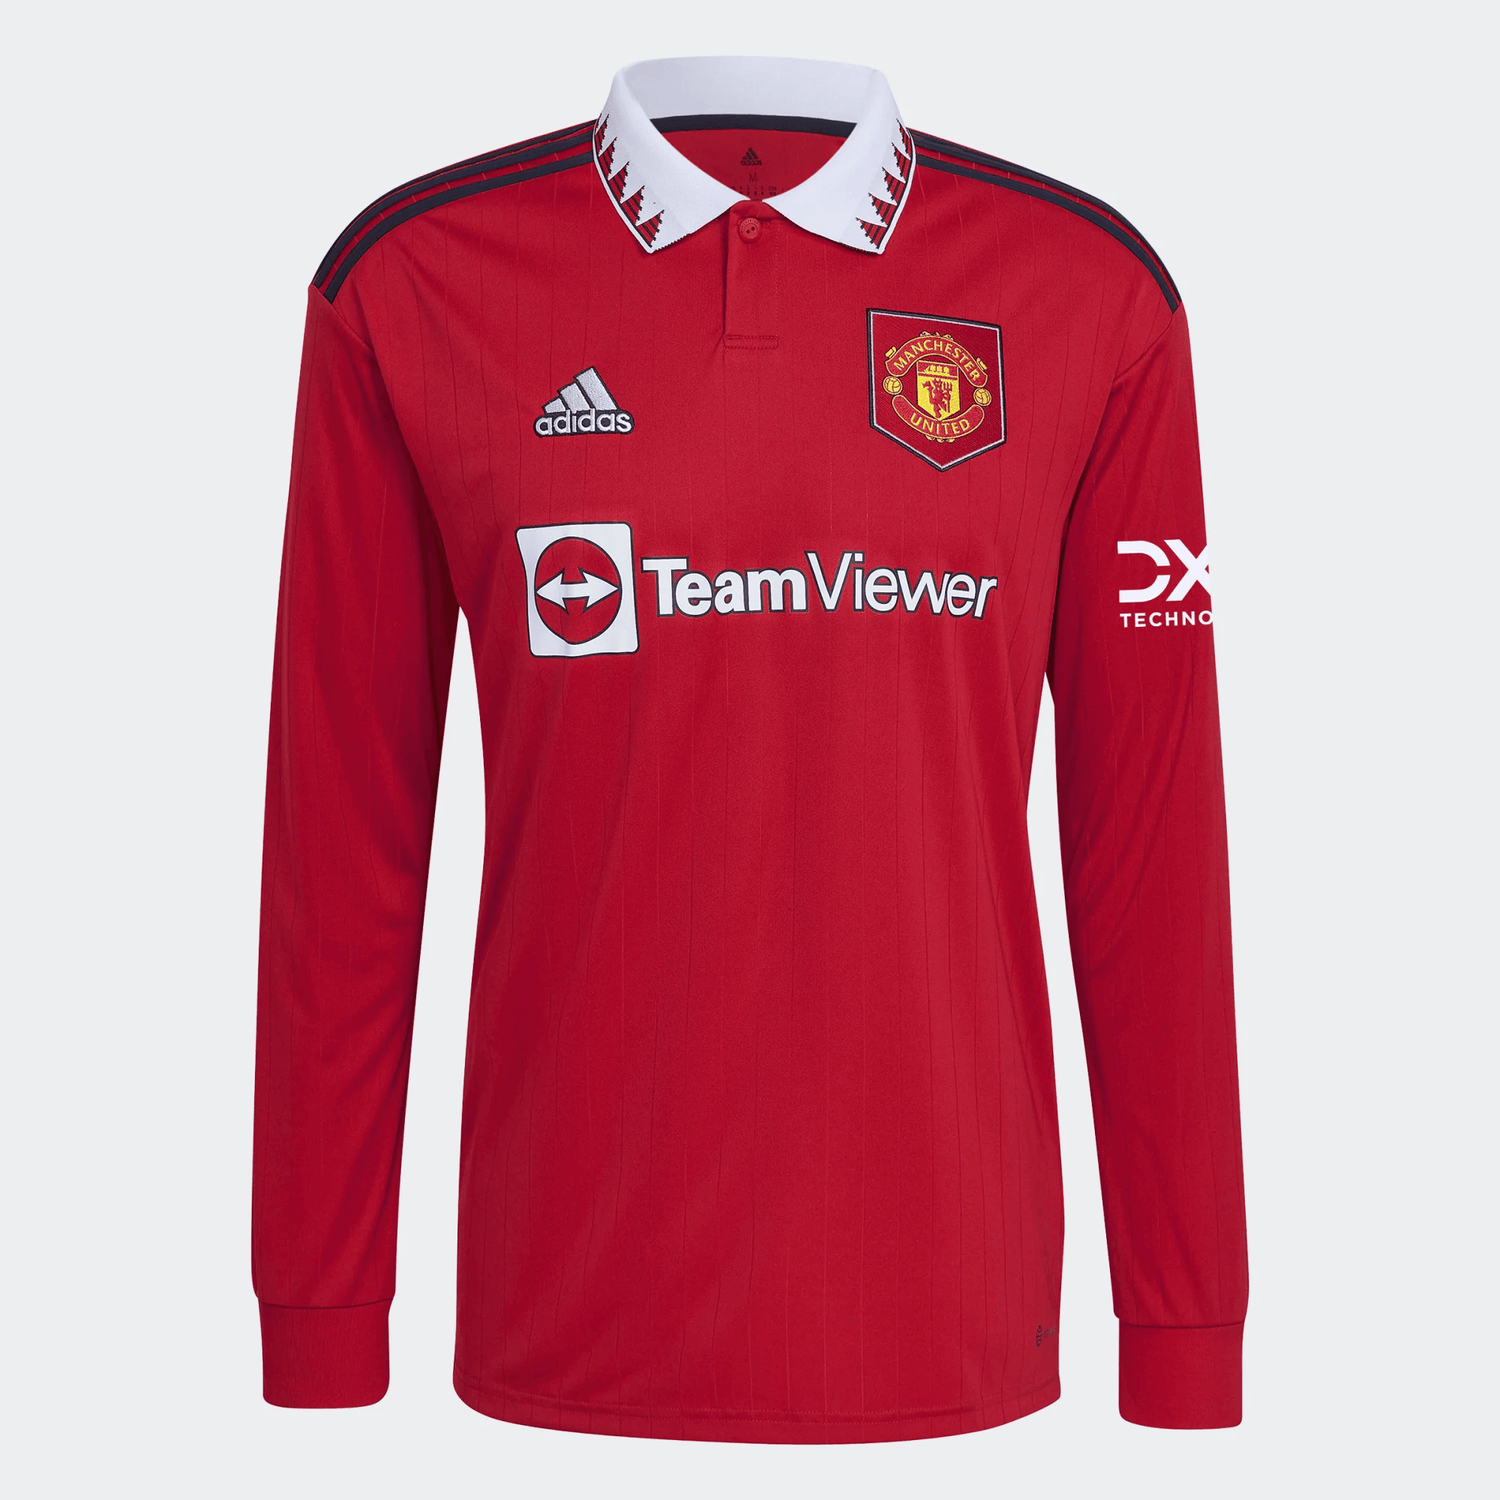 adidas 2022-23 Manchester United Home Long Sleeve Jersey - Red-White (Front)